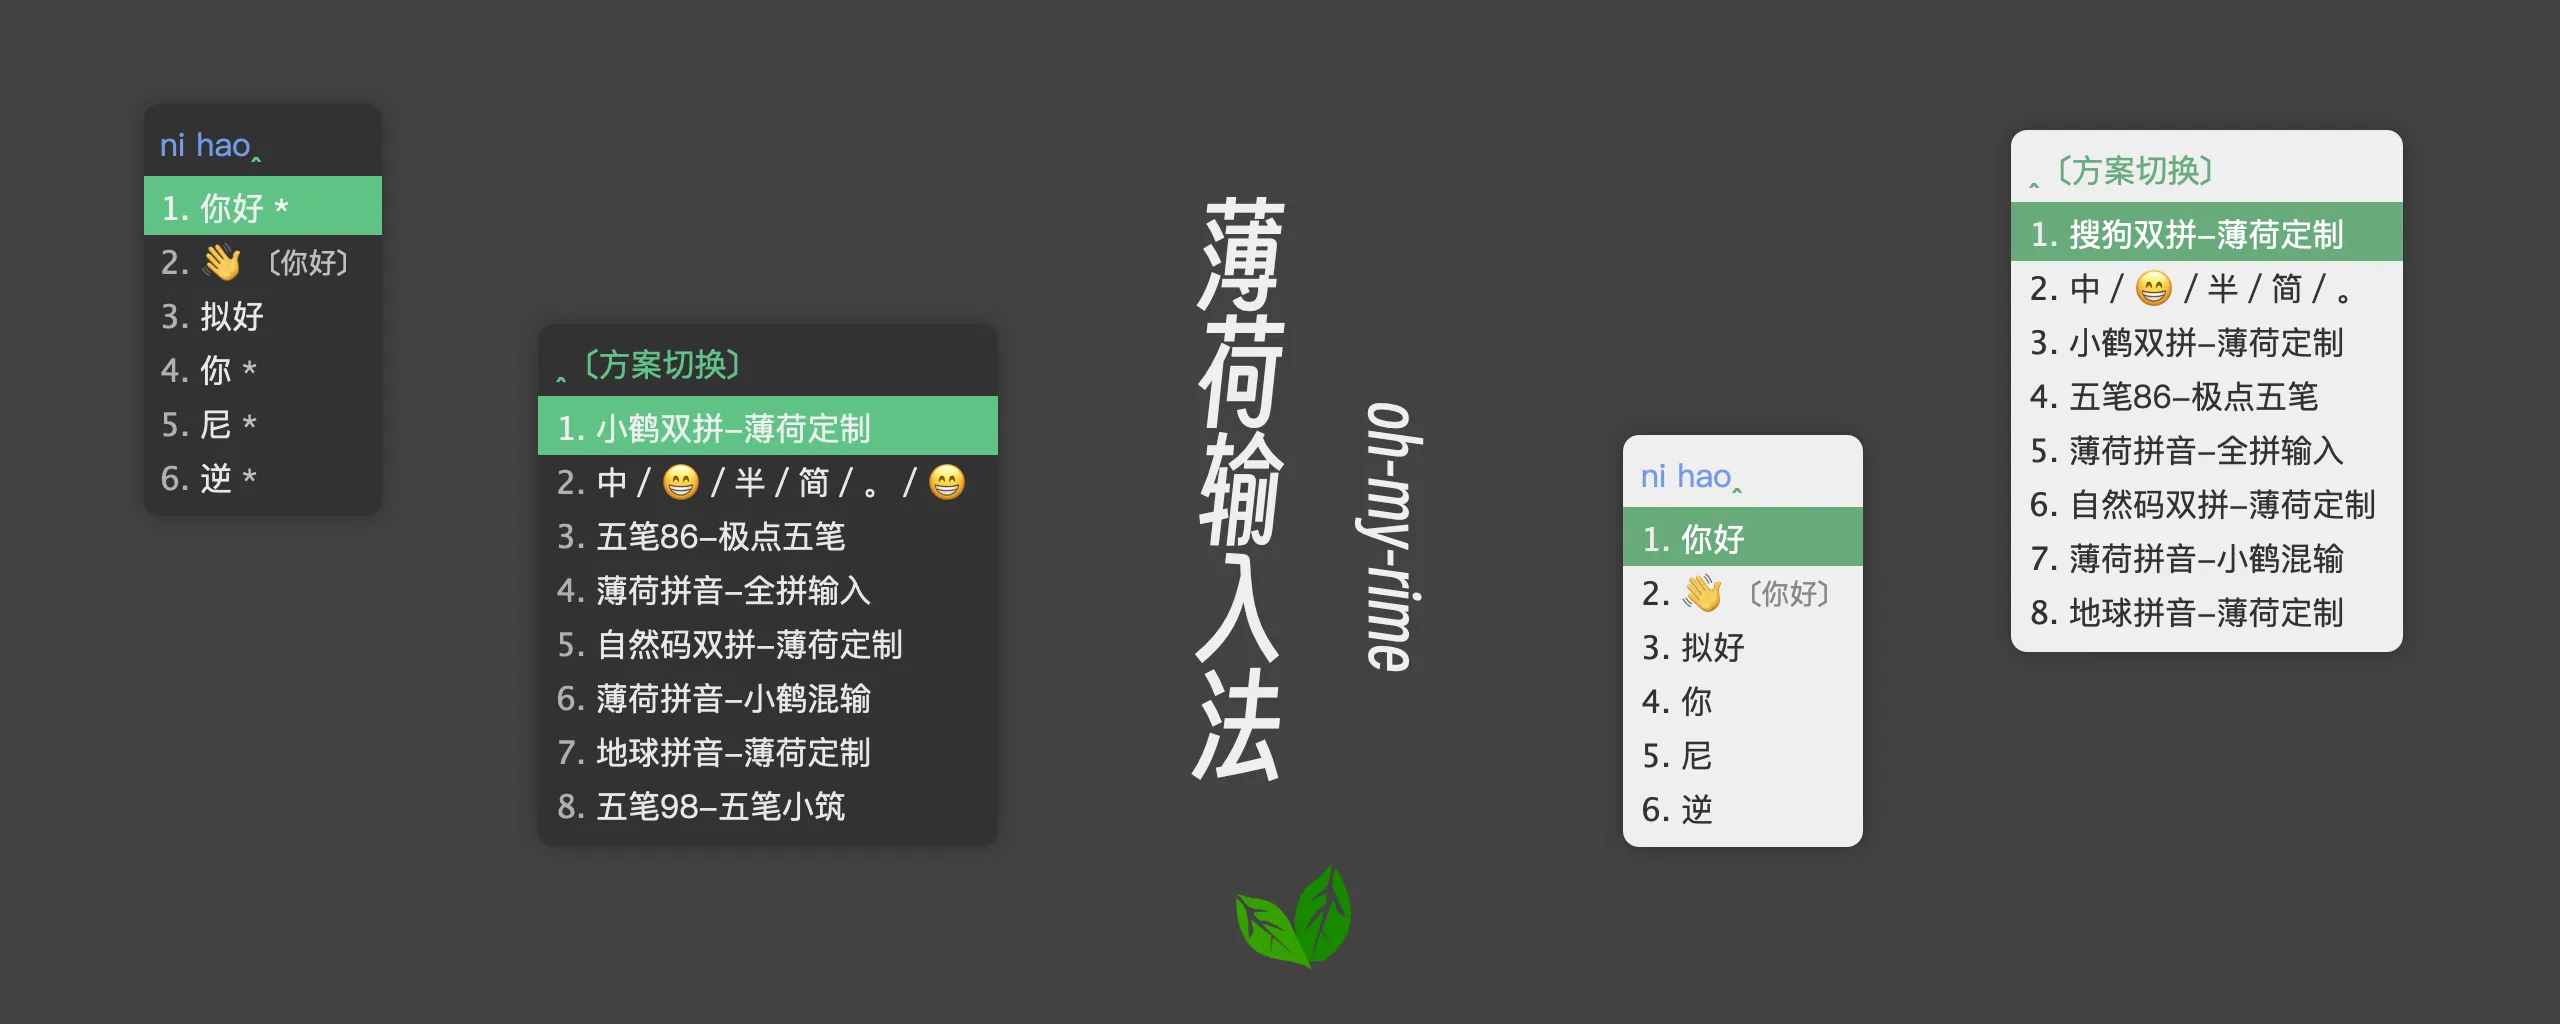 Double Pinyin Code Conversion to Normal